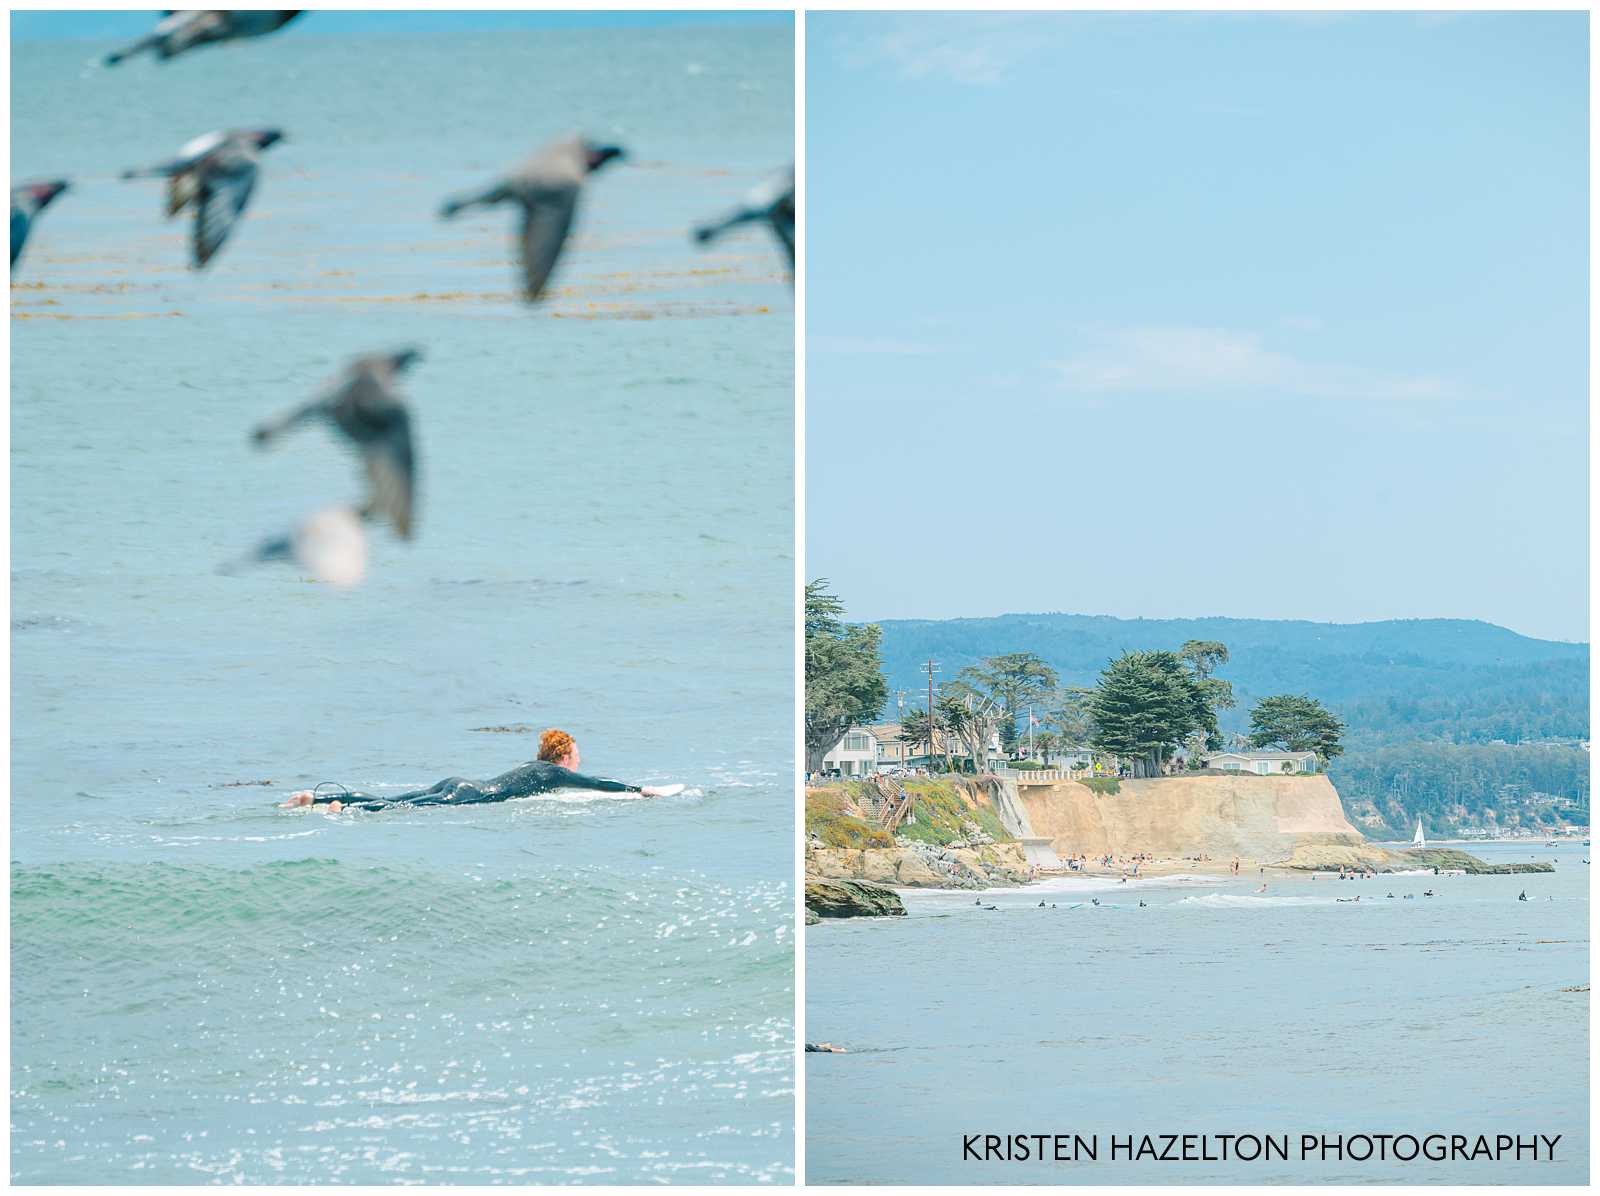 Redheaded surfer paddling in the ocean with birds flying overhead